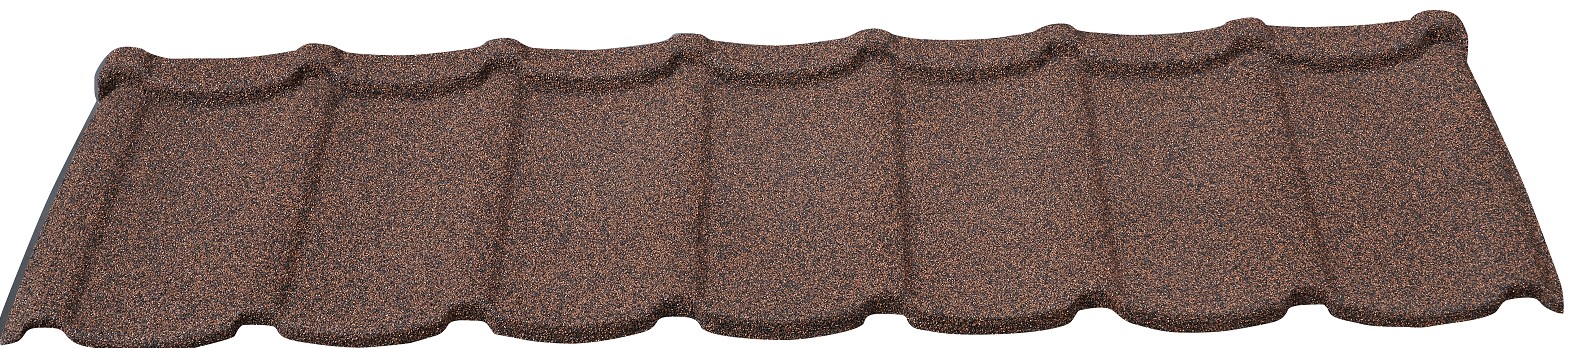 New Sunlight Roof top double roman roof tiles suppliers supply for Courtyard-8